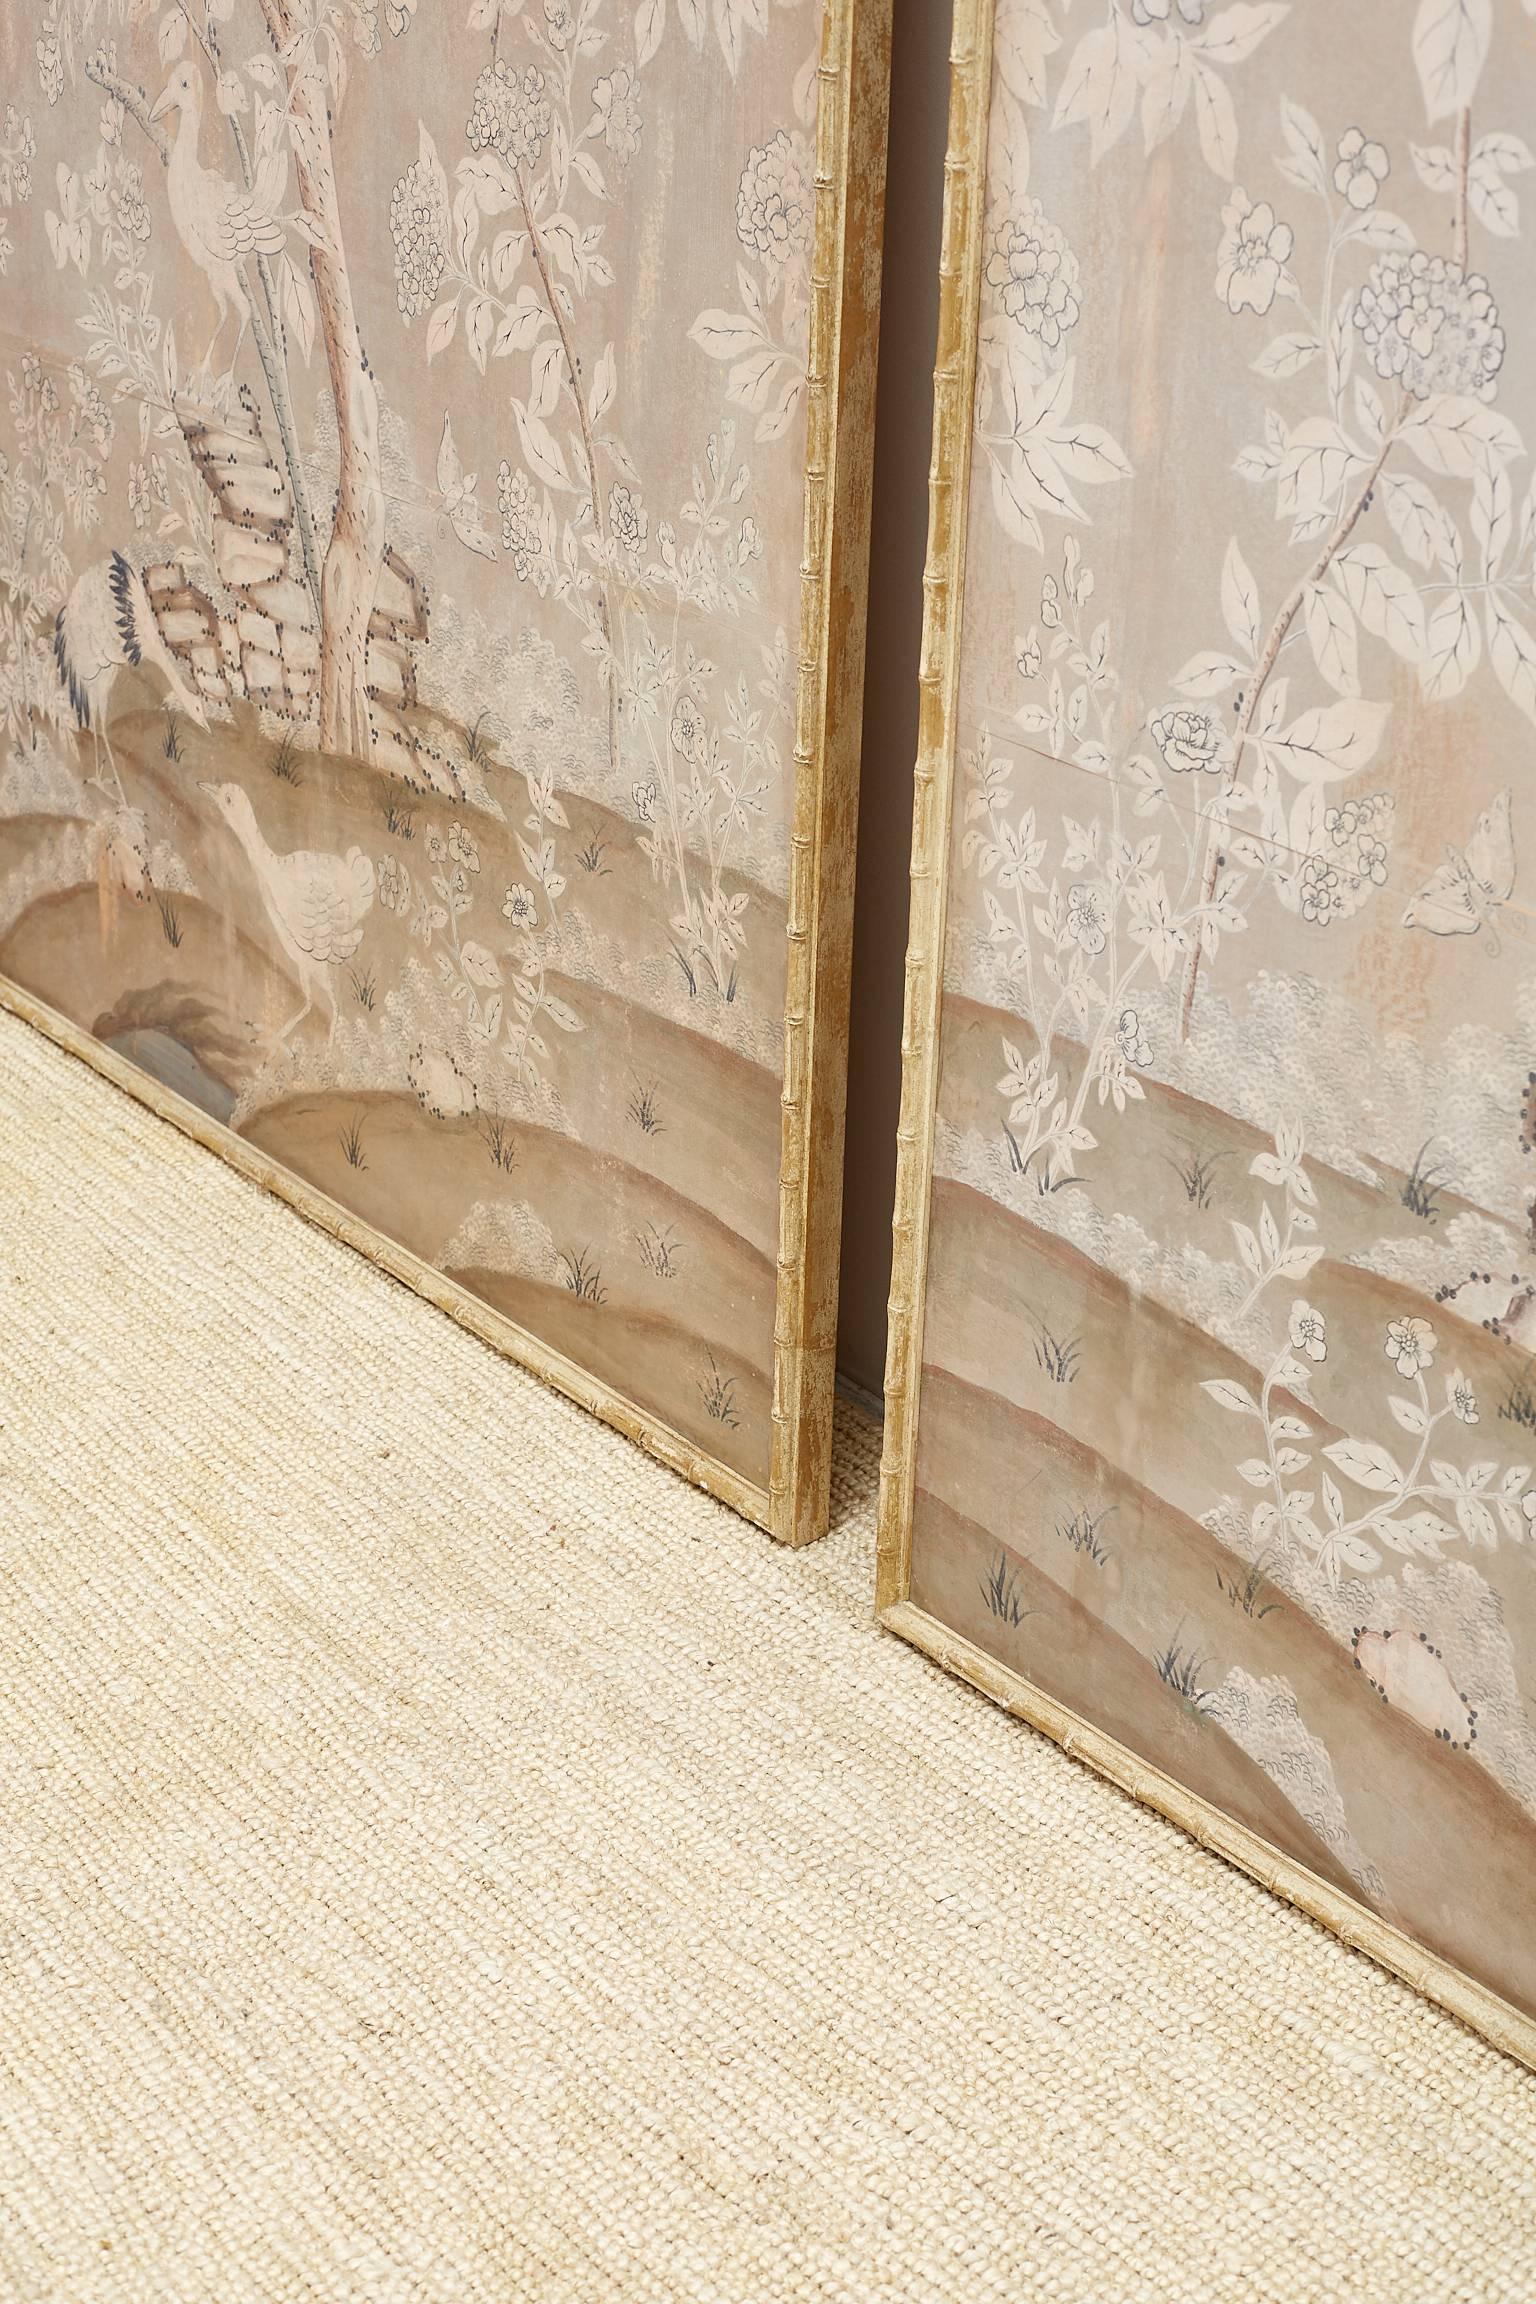 19th Century Monumental Chinoiserie Wallpaper Panels by Dennis and Leen